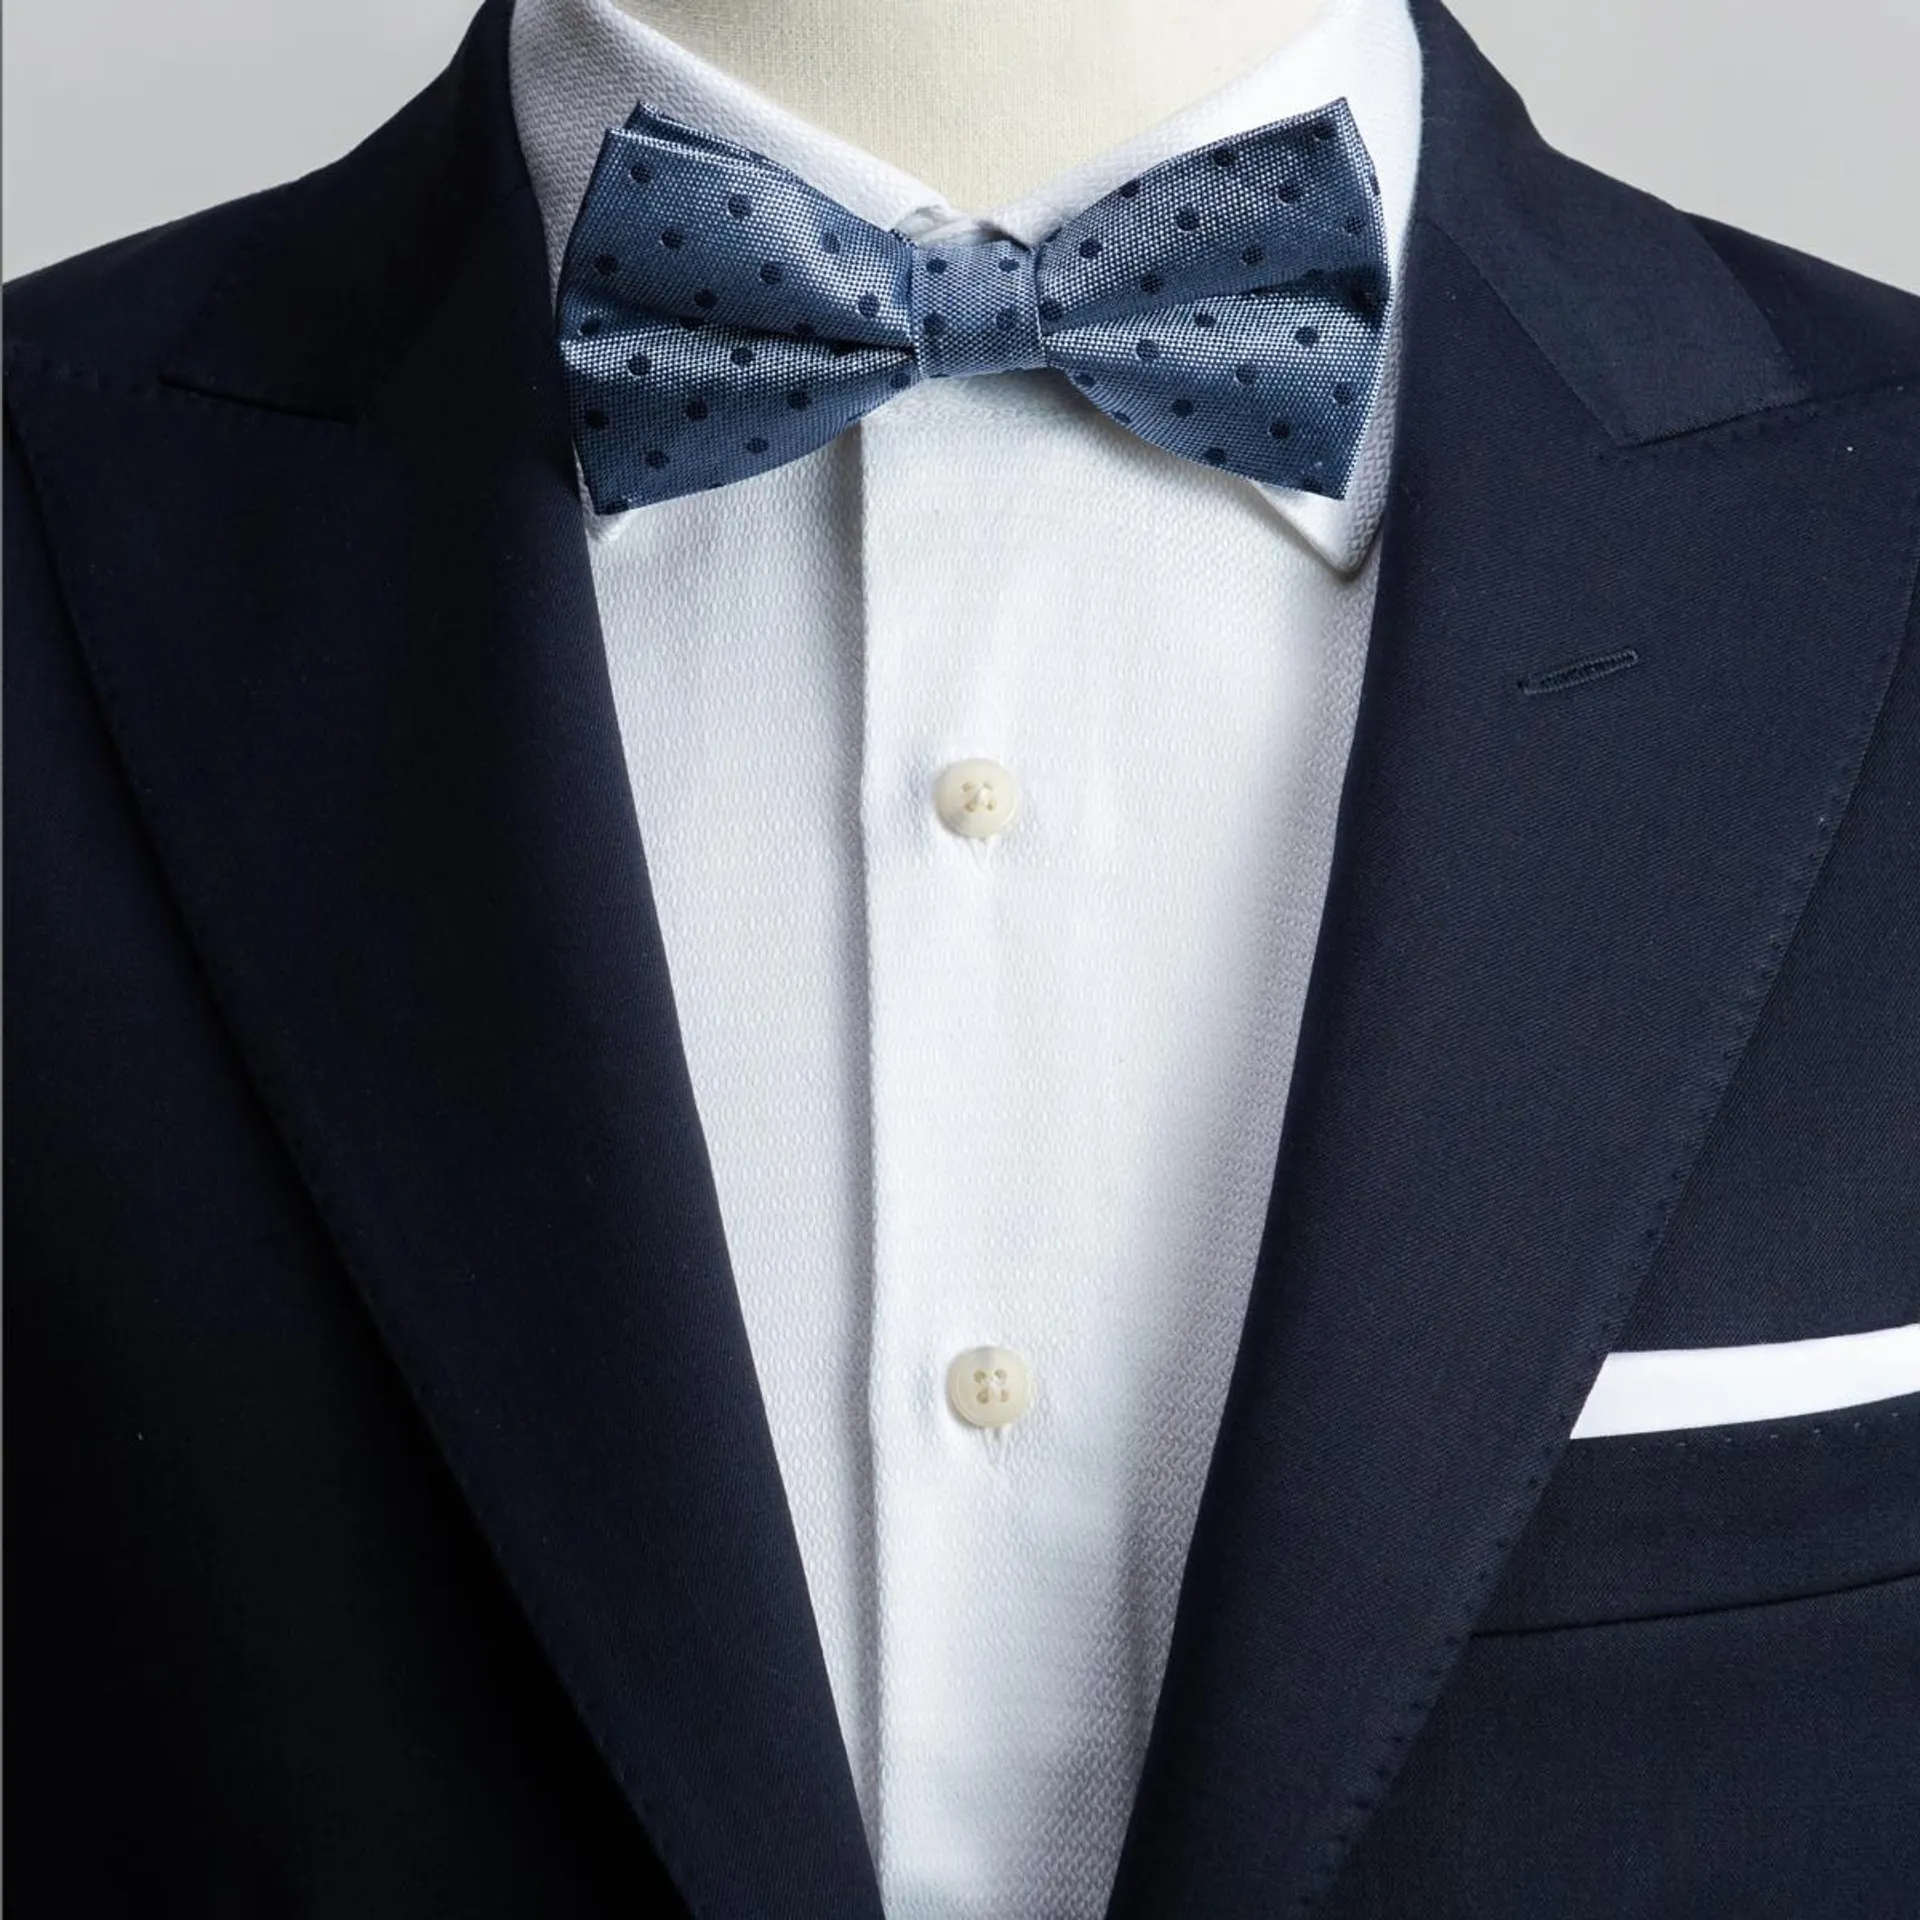 Blue dotted bow tie